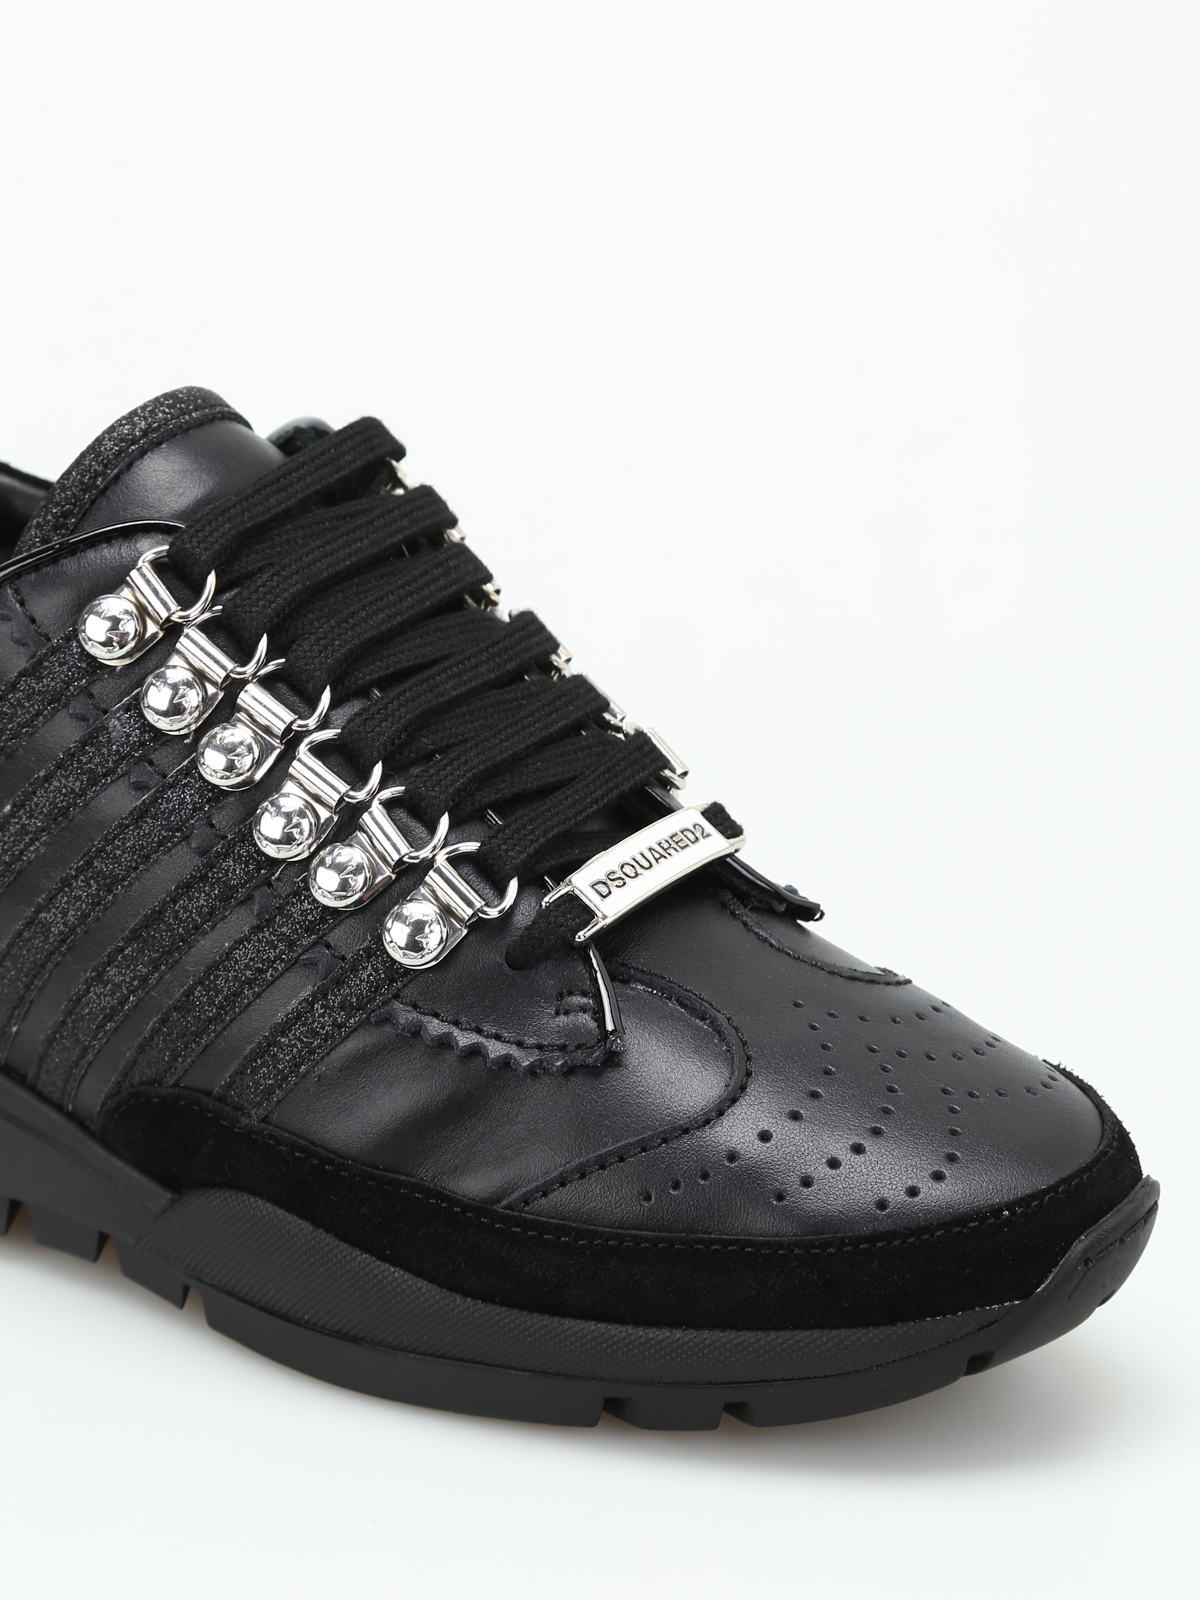 Dsquared2 - 251 black leather sneakers 